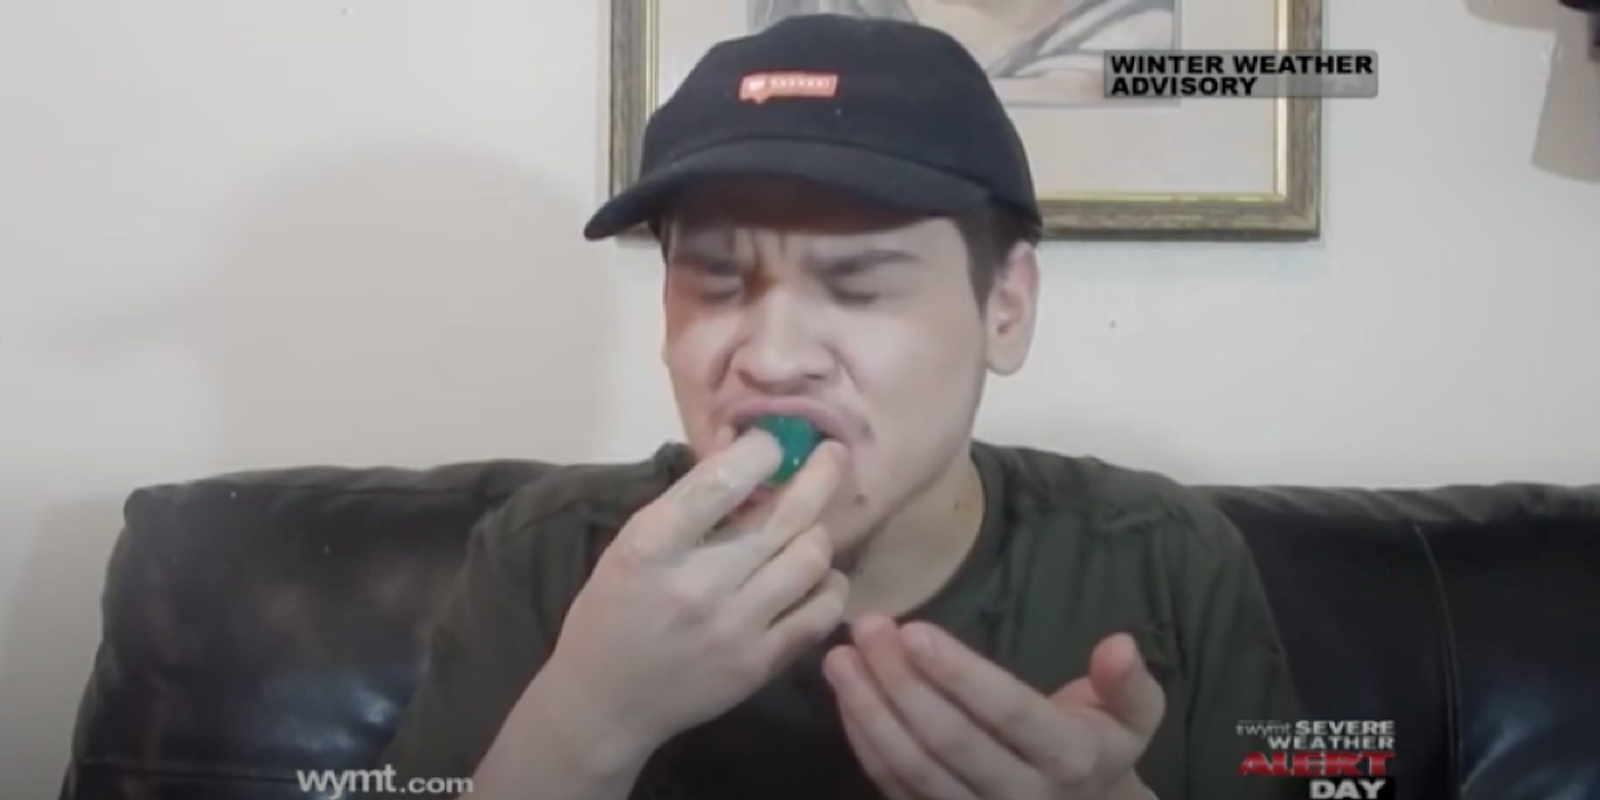 what is the tide pod challenge - marc pagan eats tide pod